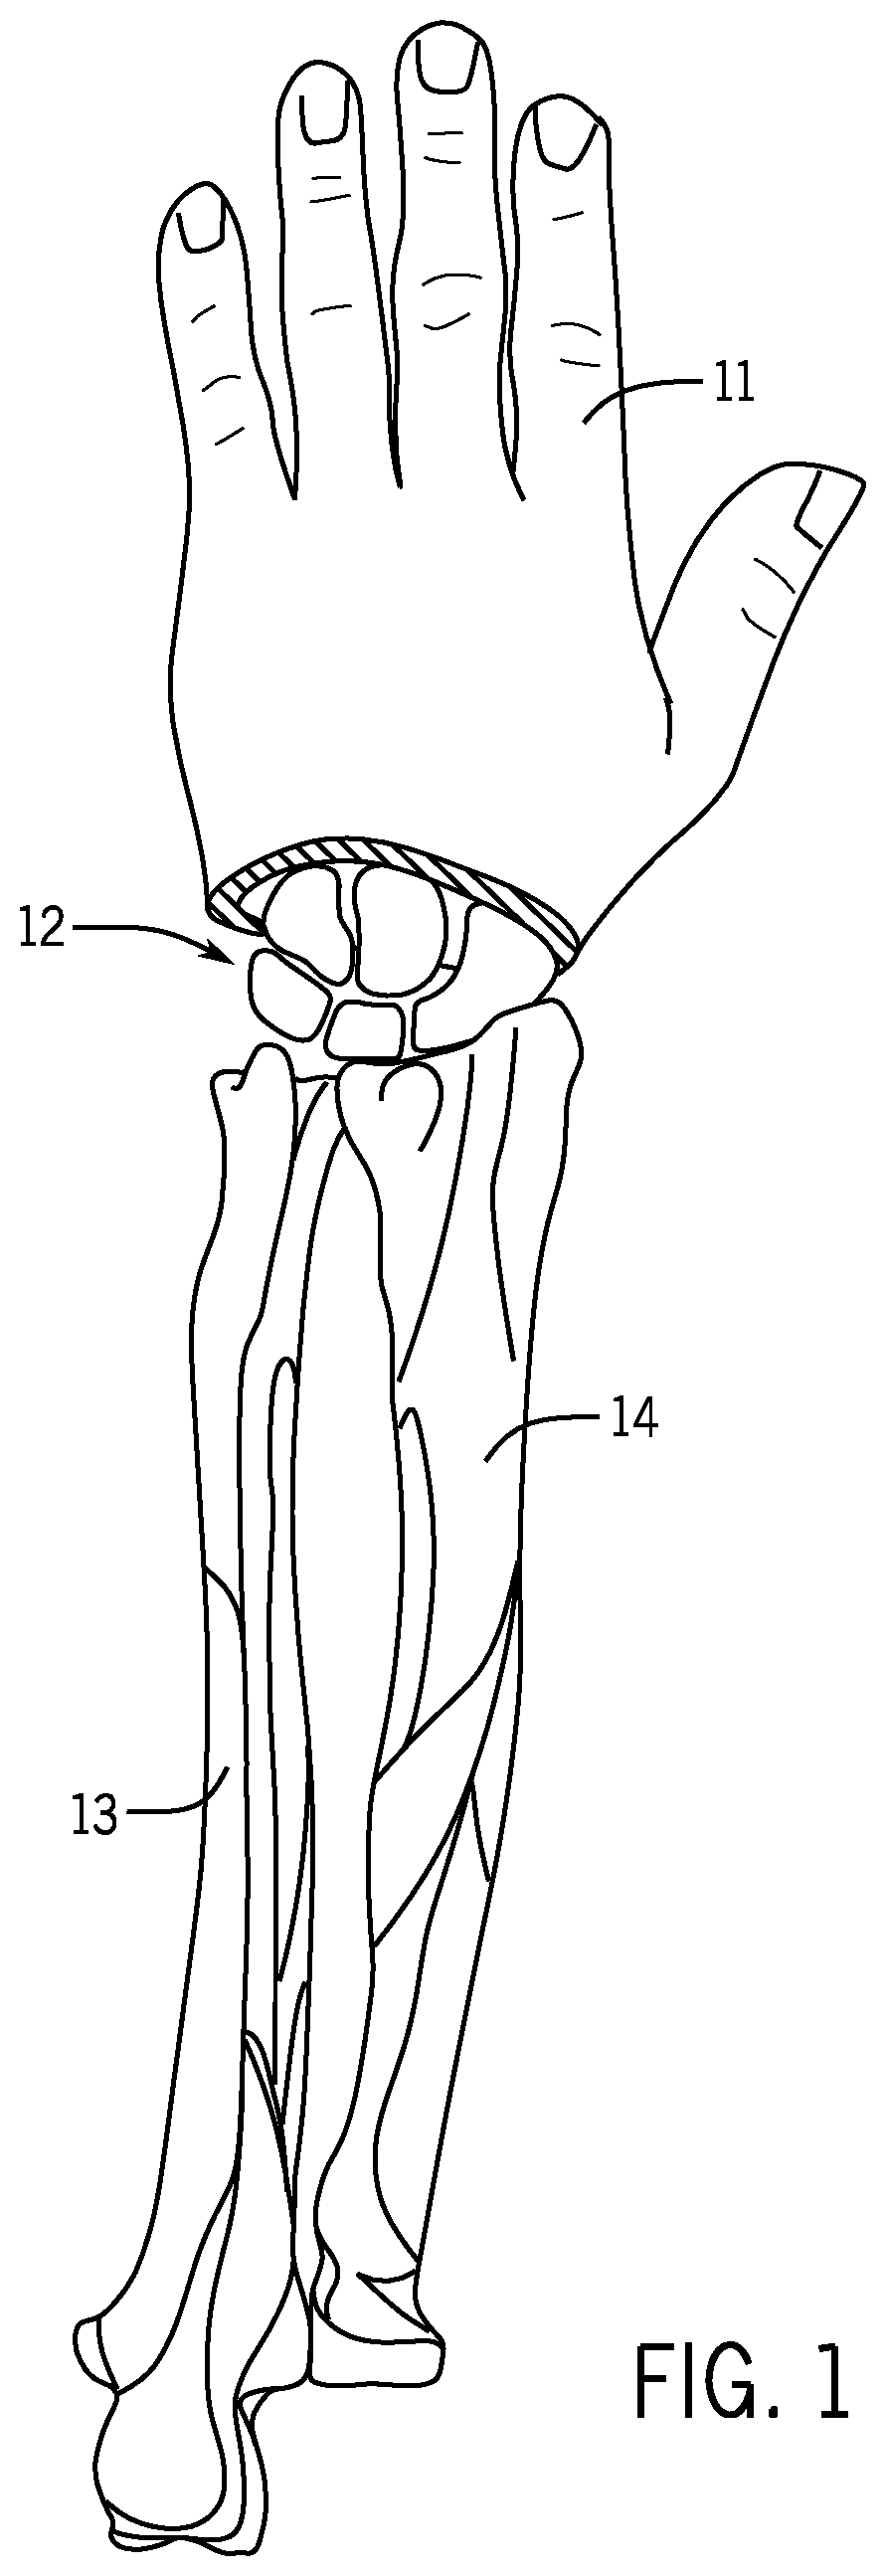 Fracture fixation device having clip for stabilizing intramedullary nail